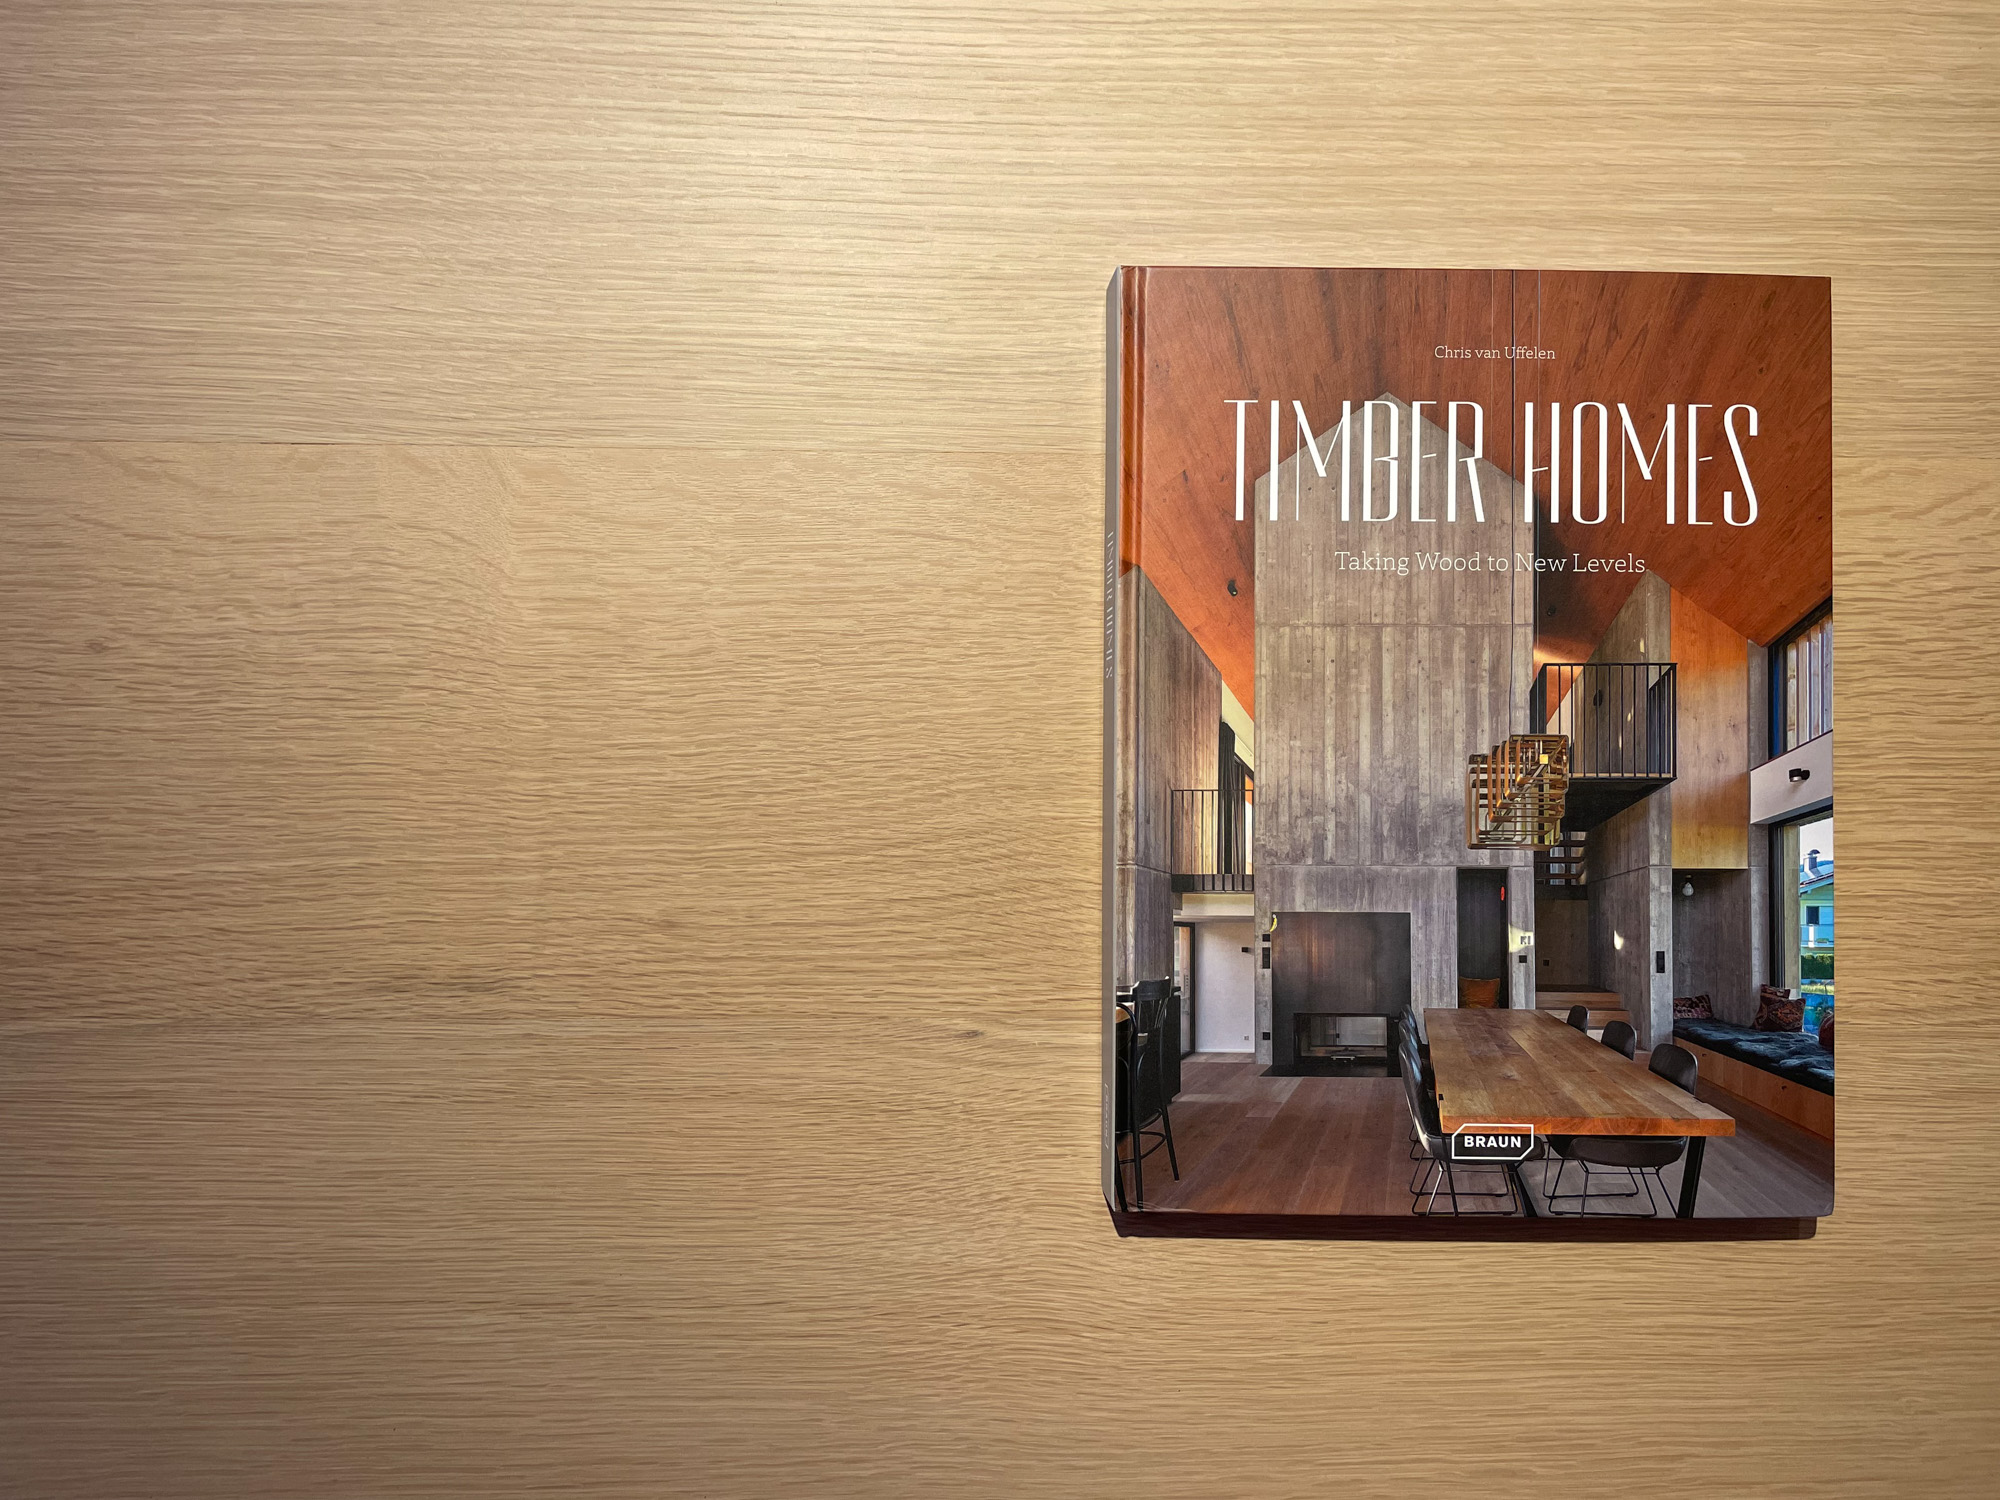 Birdseye Projects Featured in New Book “Timber Homes”